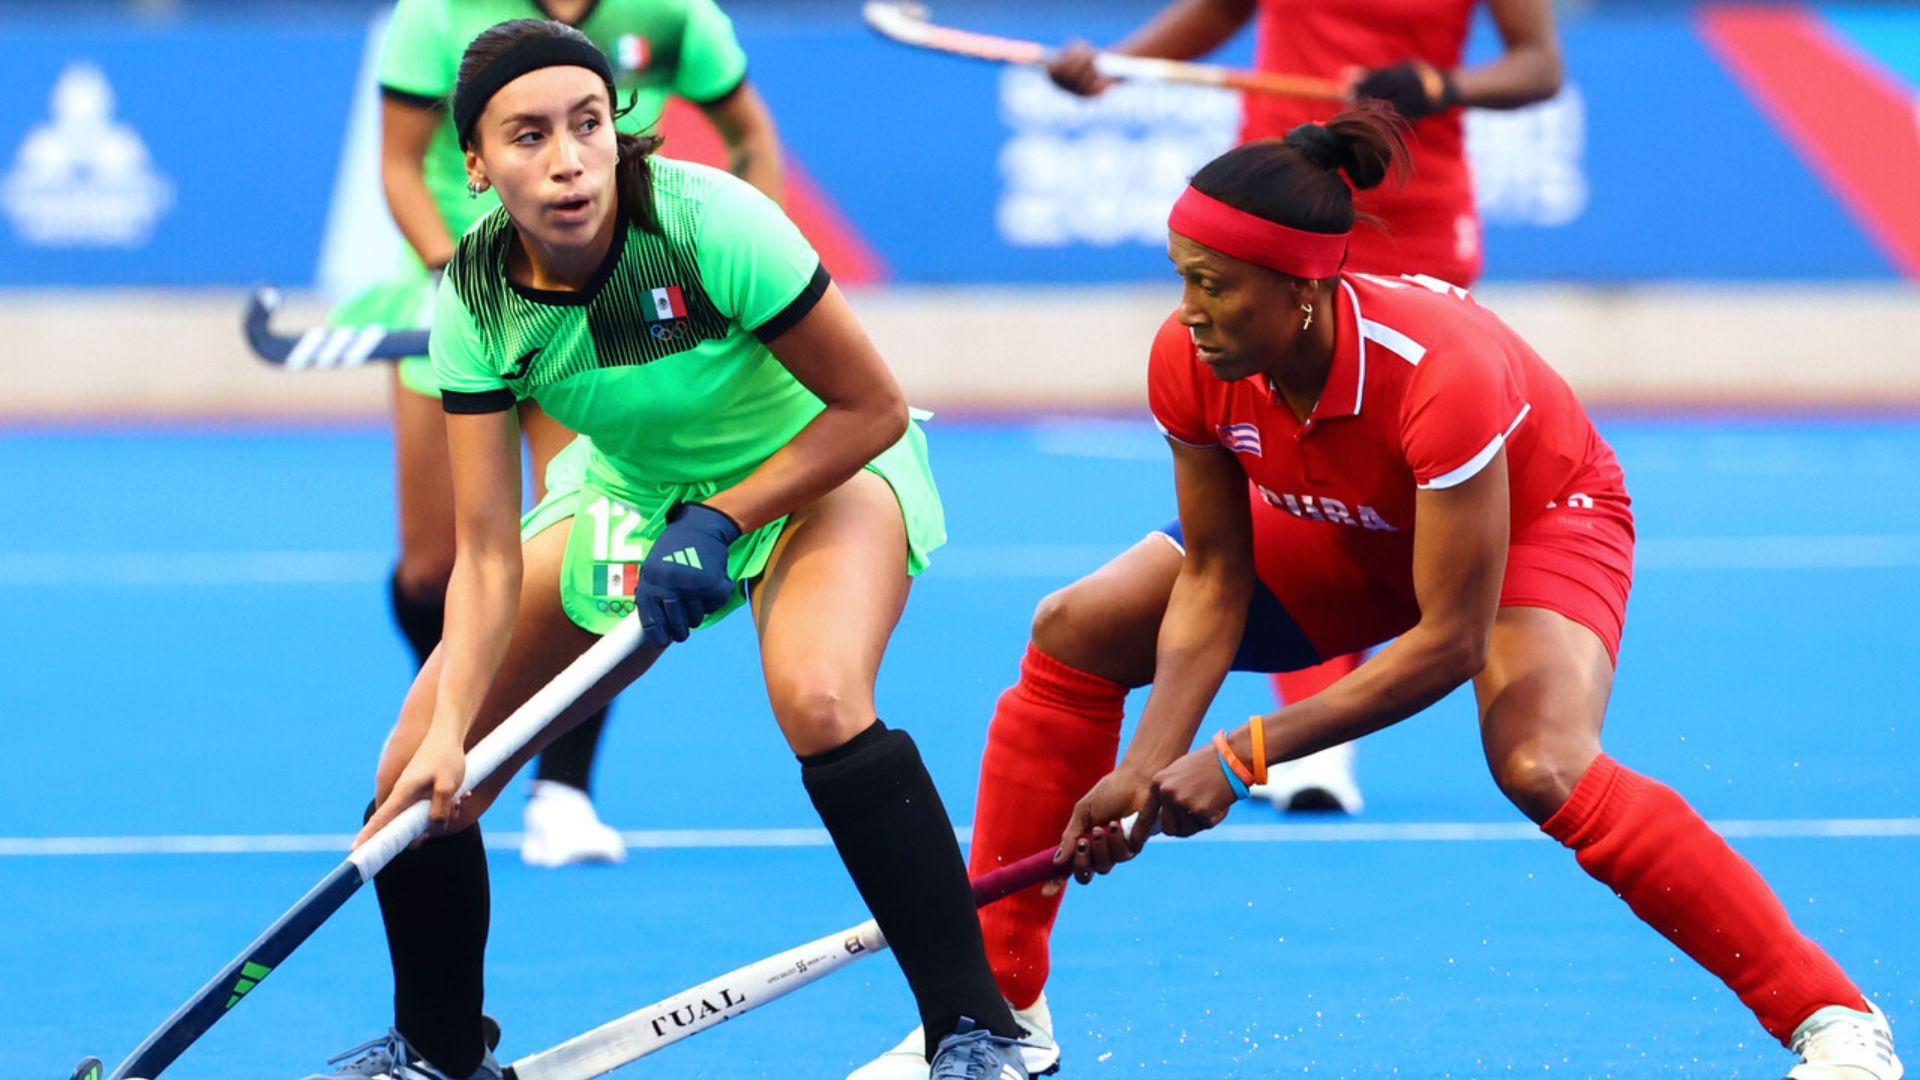 Mexico and Cuba draw, complicate their chances in field hockey